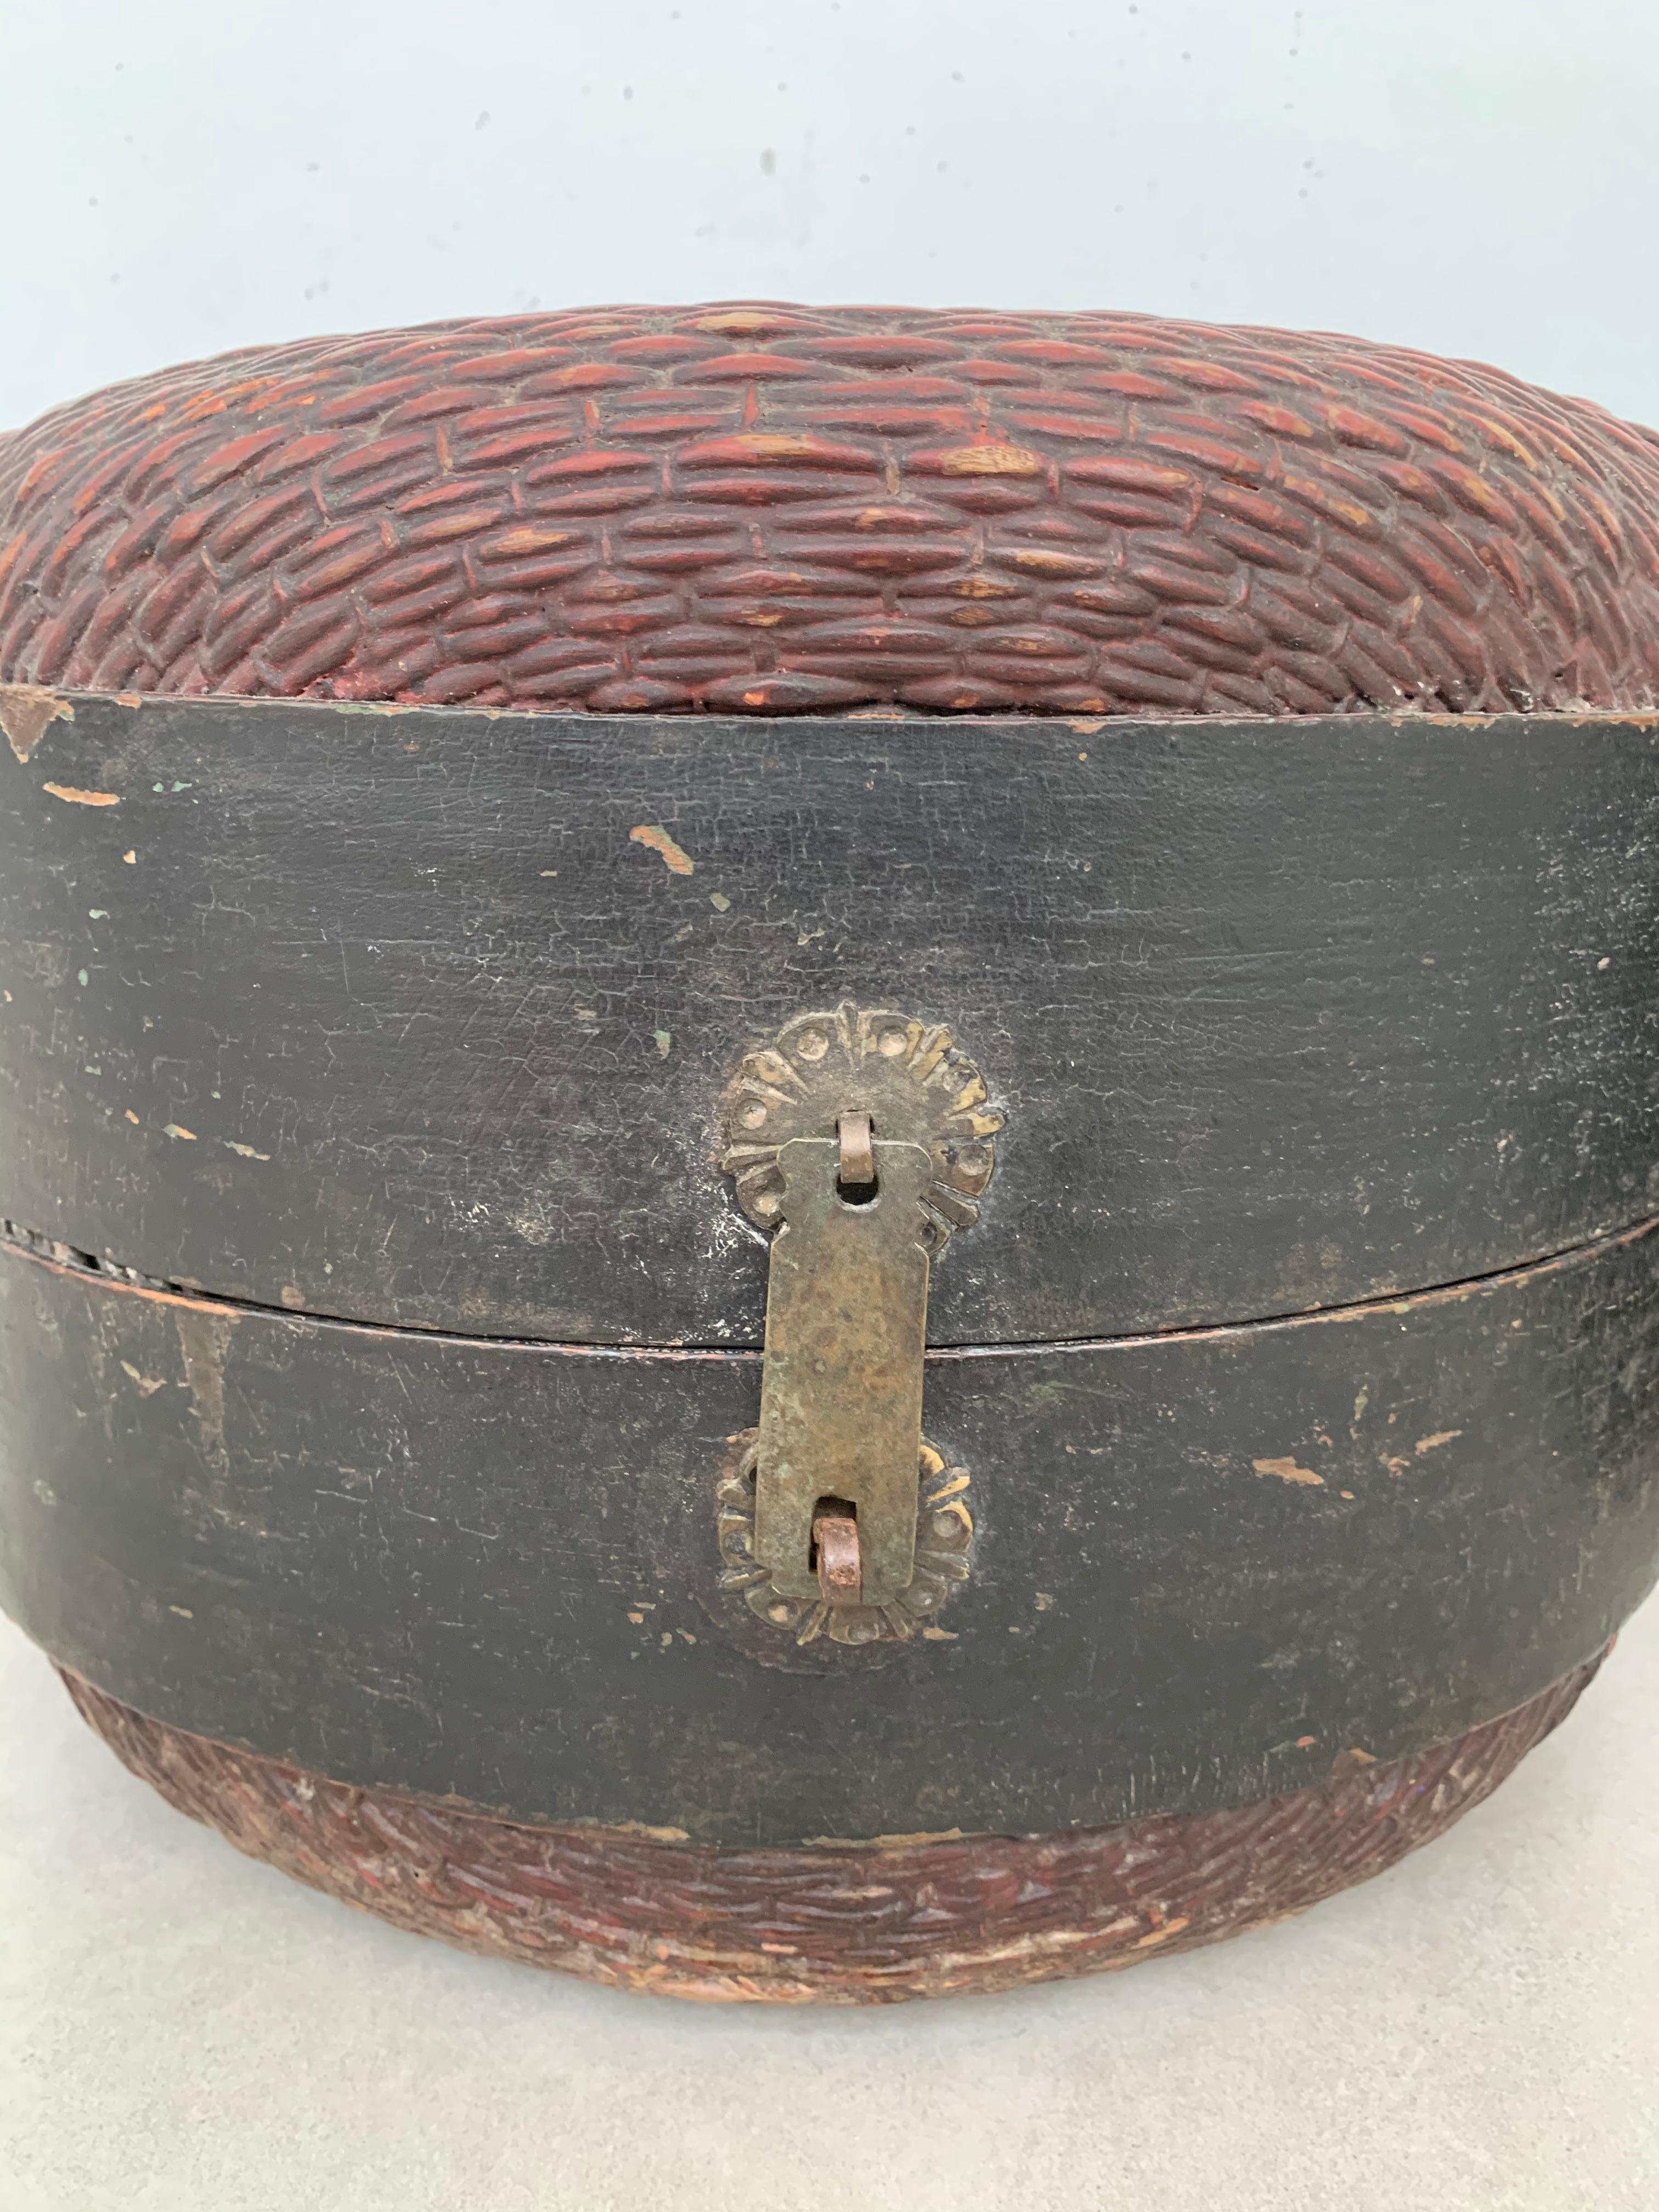 This pair of hat boxes from China feature curved wooden supports and the original metal fittings, They were hand-crafted using willow reads and have a weathered and age related patina. 

Dimensions: Height 23cm x Diameter 32cm & Height 25cm x